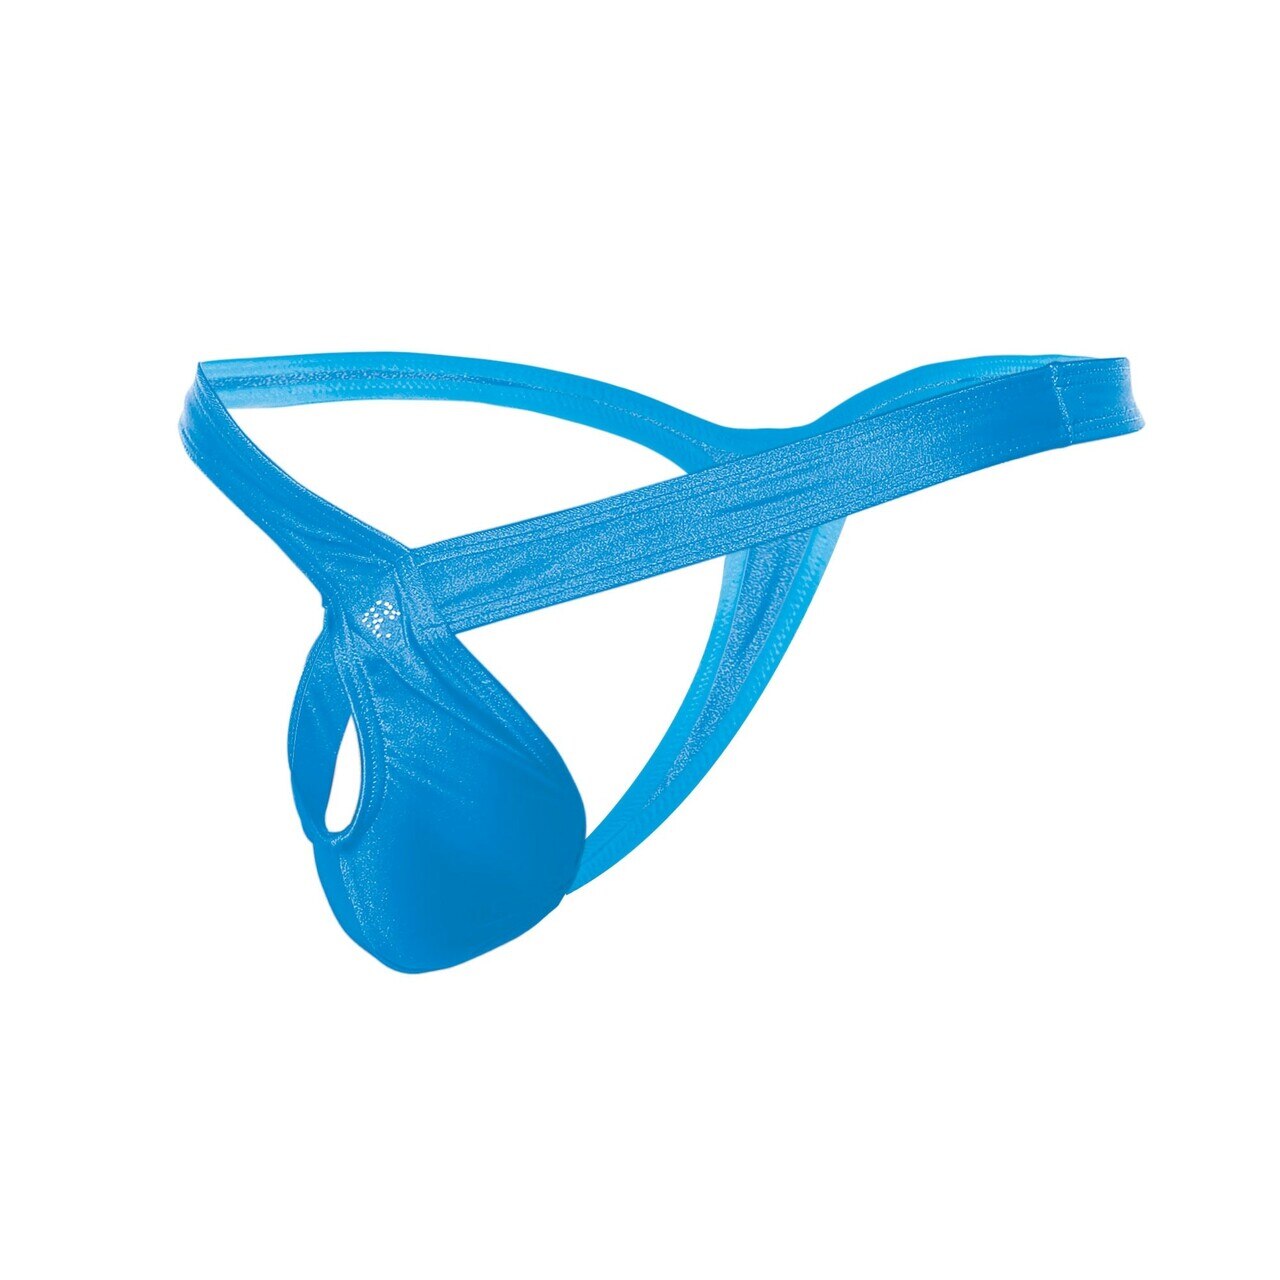 Mens Joe Snyder Infinity Hole Thong Turquoise